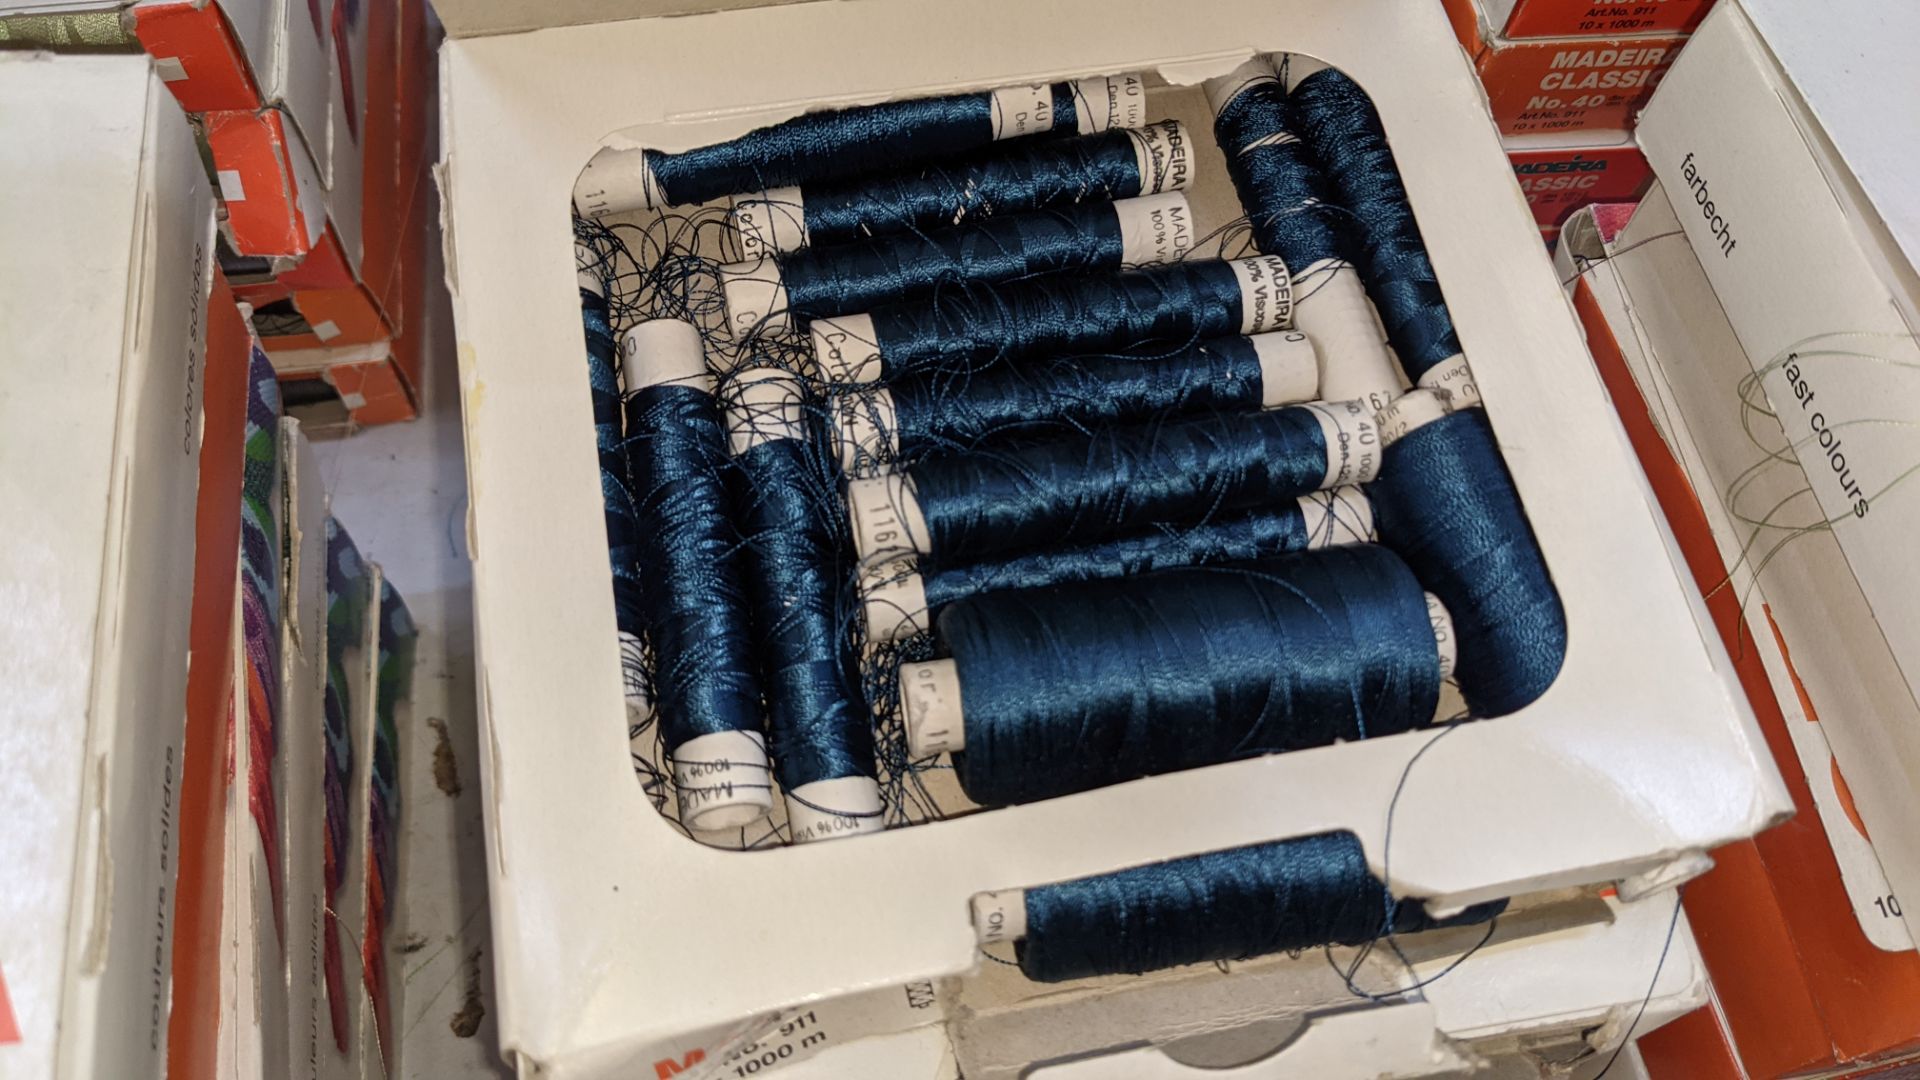 30 boxes of Madeira Classic No. 40 rayon embroidery thread - Image 9 of 12